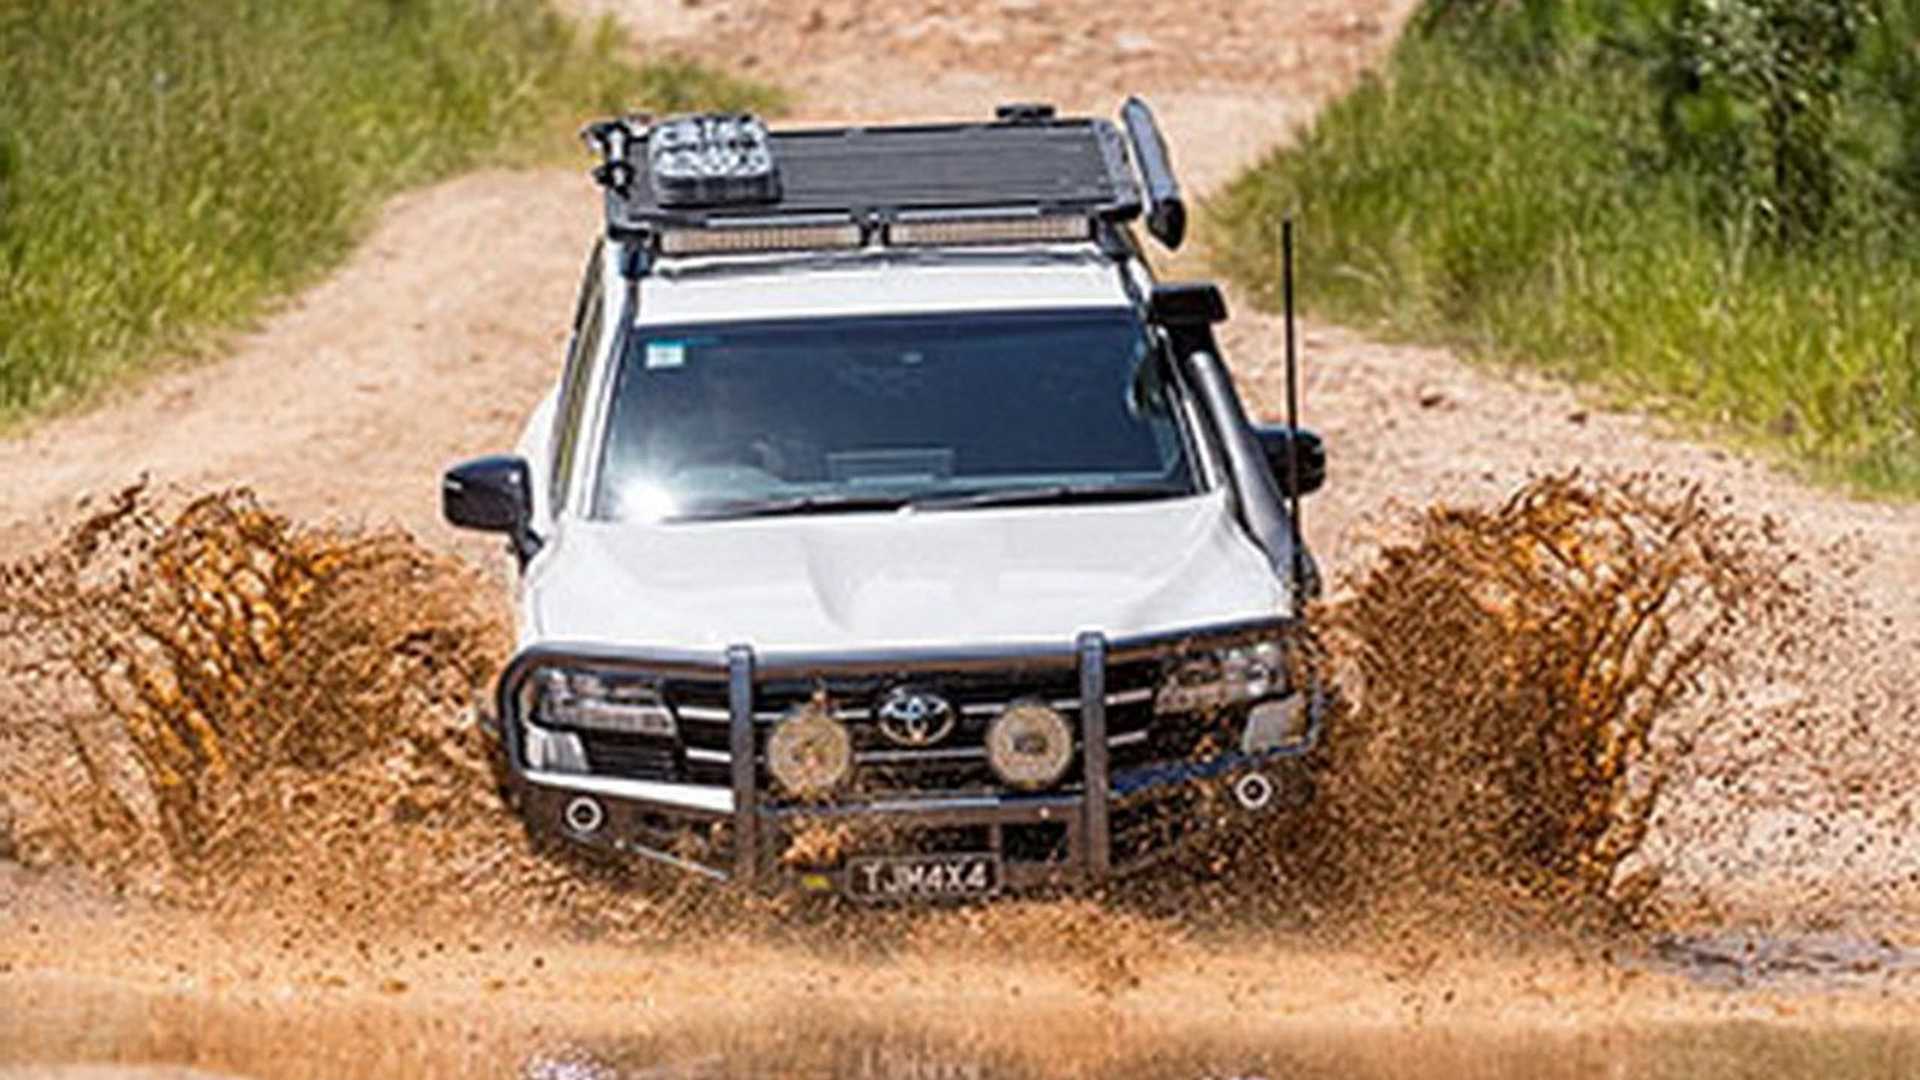 TJM's Toyota Land Cruiser 300 is the ultimate weapon